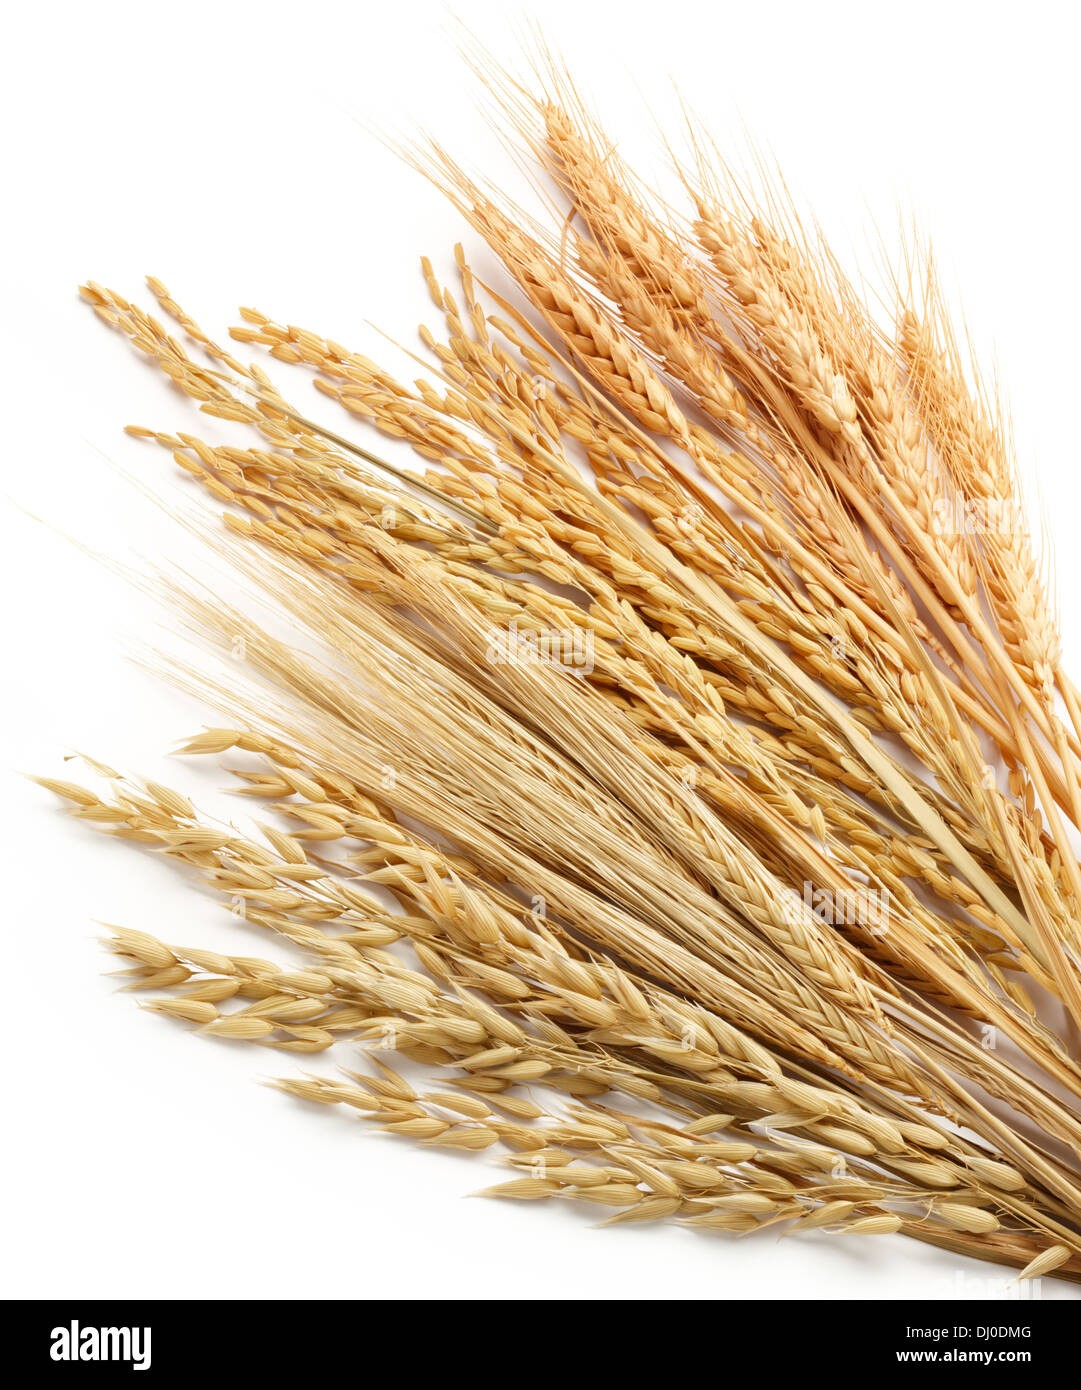 various type of cereals including wheat (triticum), paddy (oryza), barley (hordeum) and oat (avena) Stock Photo